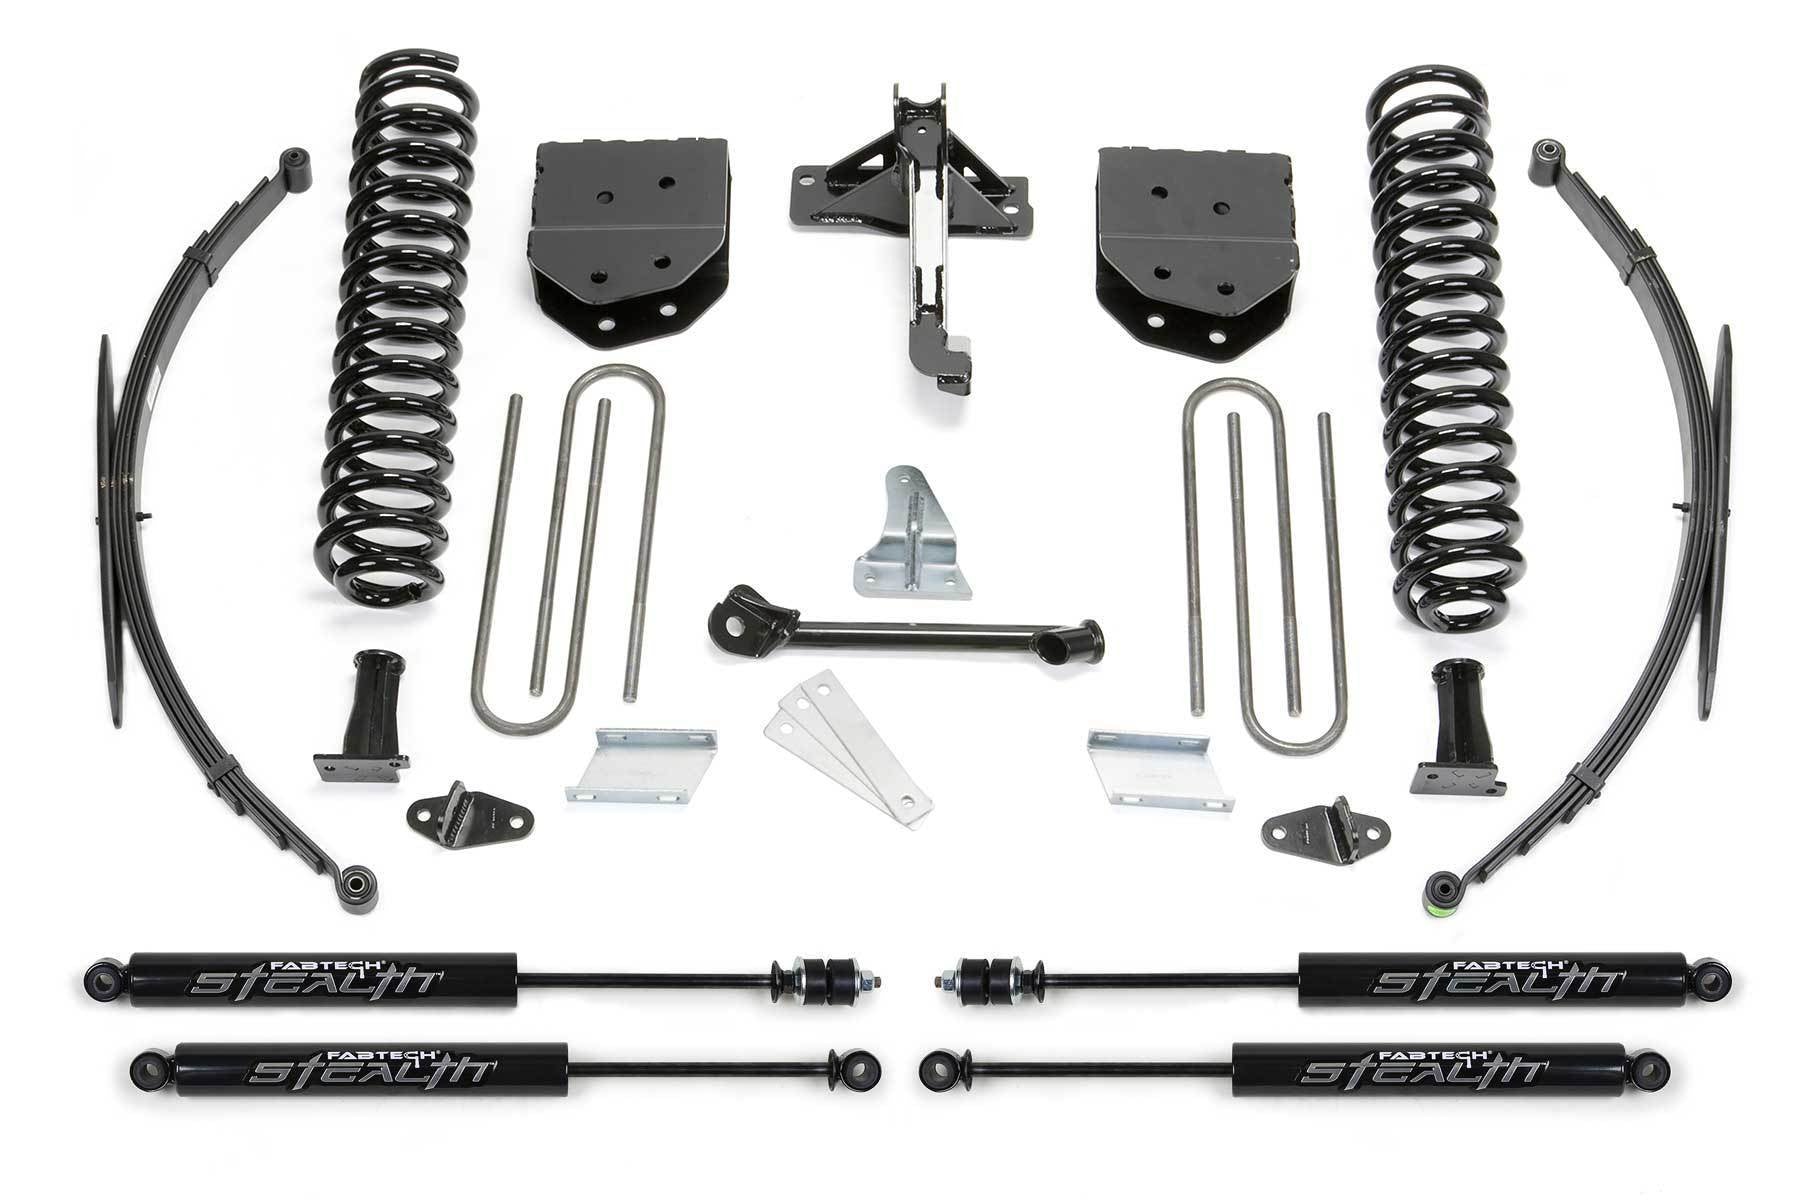 8" BASIC SYS W/STEALTH & RR LF SPRNGS 2008-16 FORD F250/350 4WD - 8" BASIC SYS W/STEAL - Fabtech - Texas Complete Truck Center